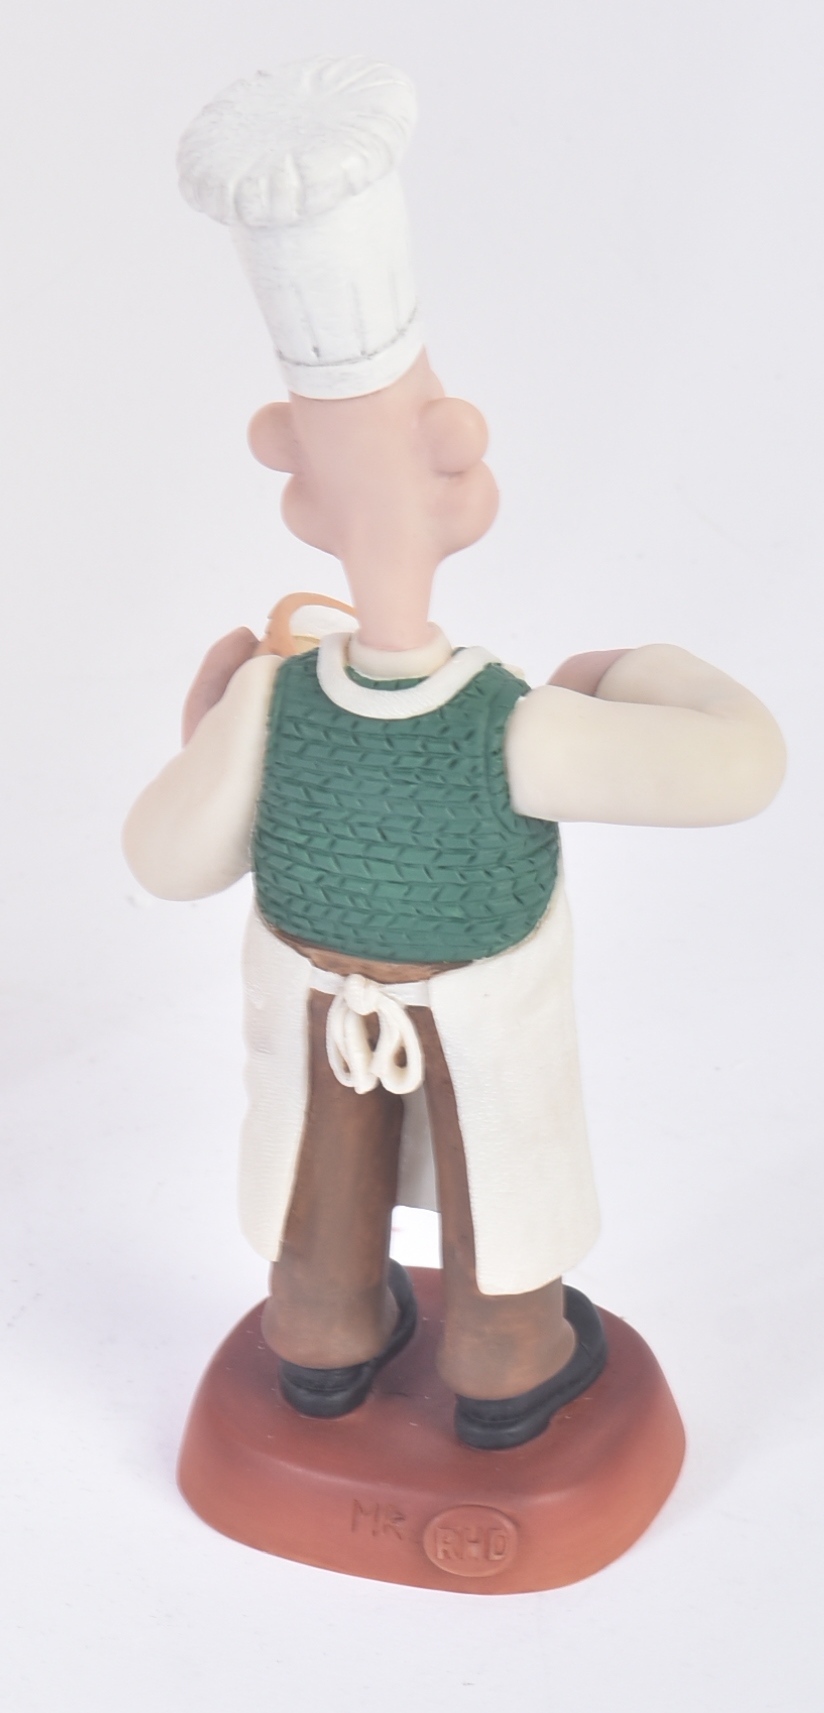 WALLACE & GROMIT - ROBERT HARROP - LIMITED EDITION FIGURINE - Image 3 of 4